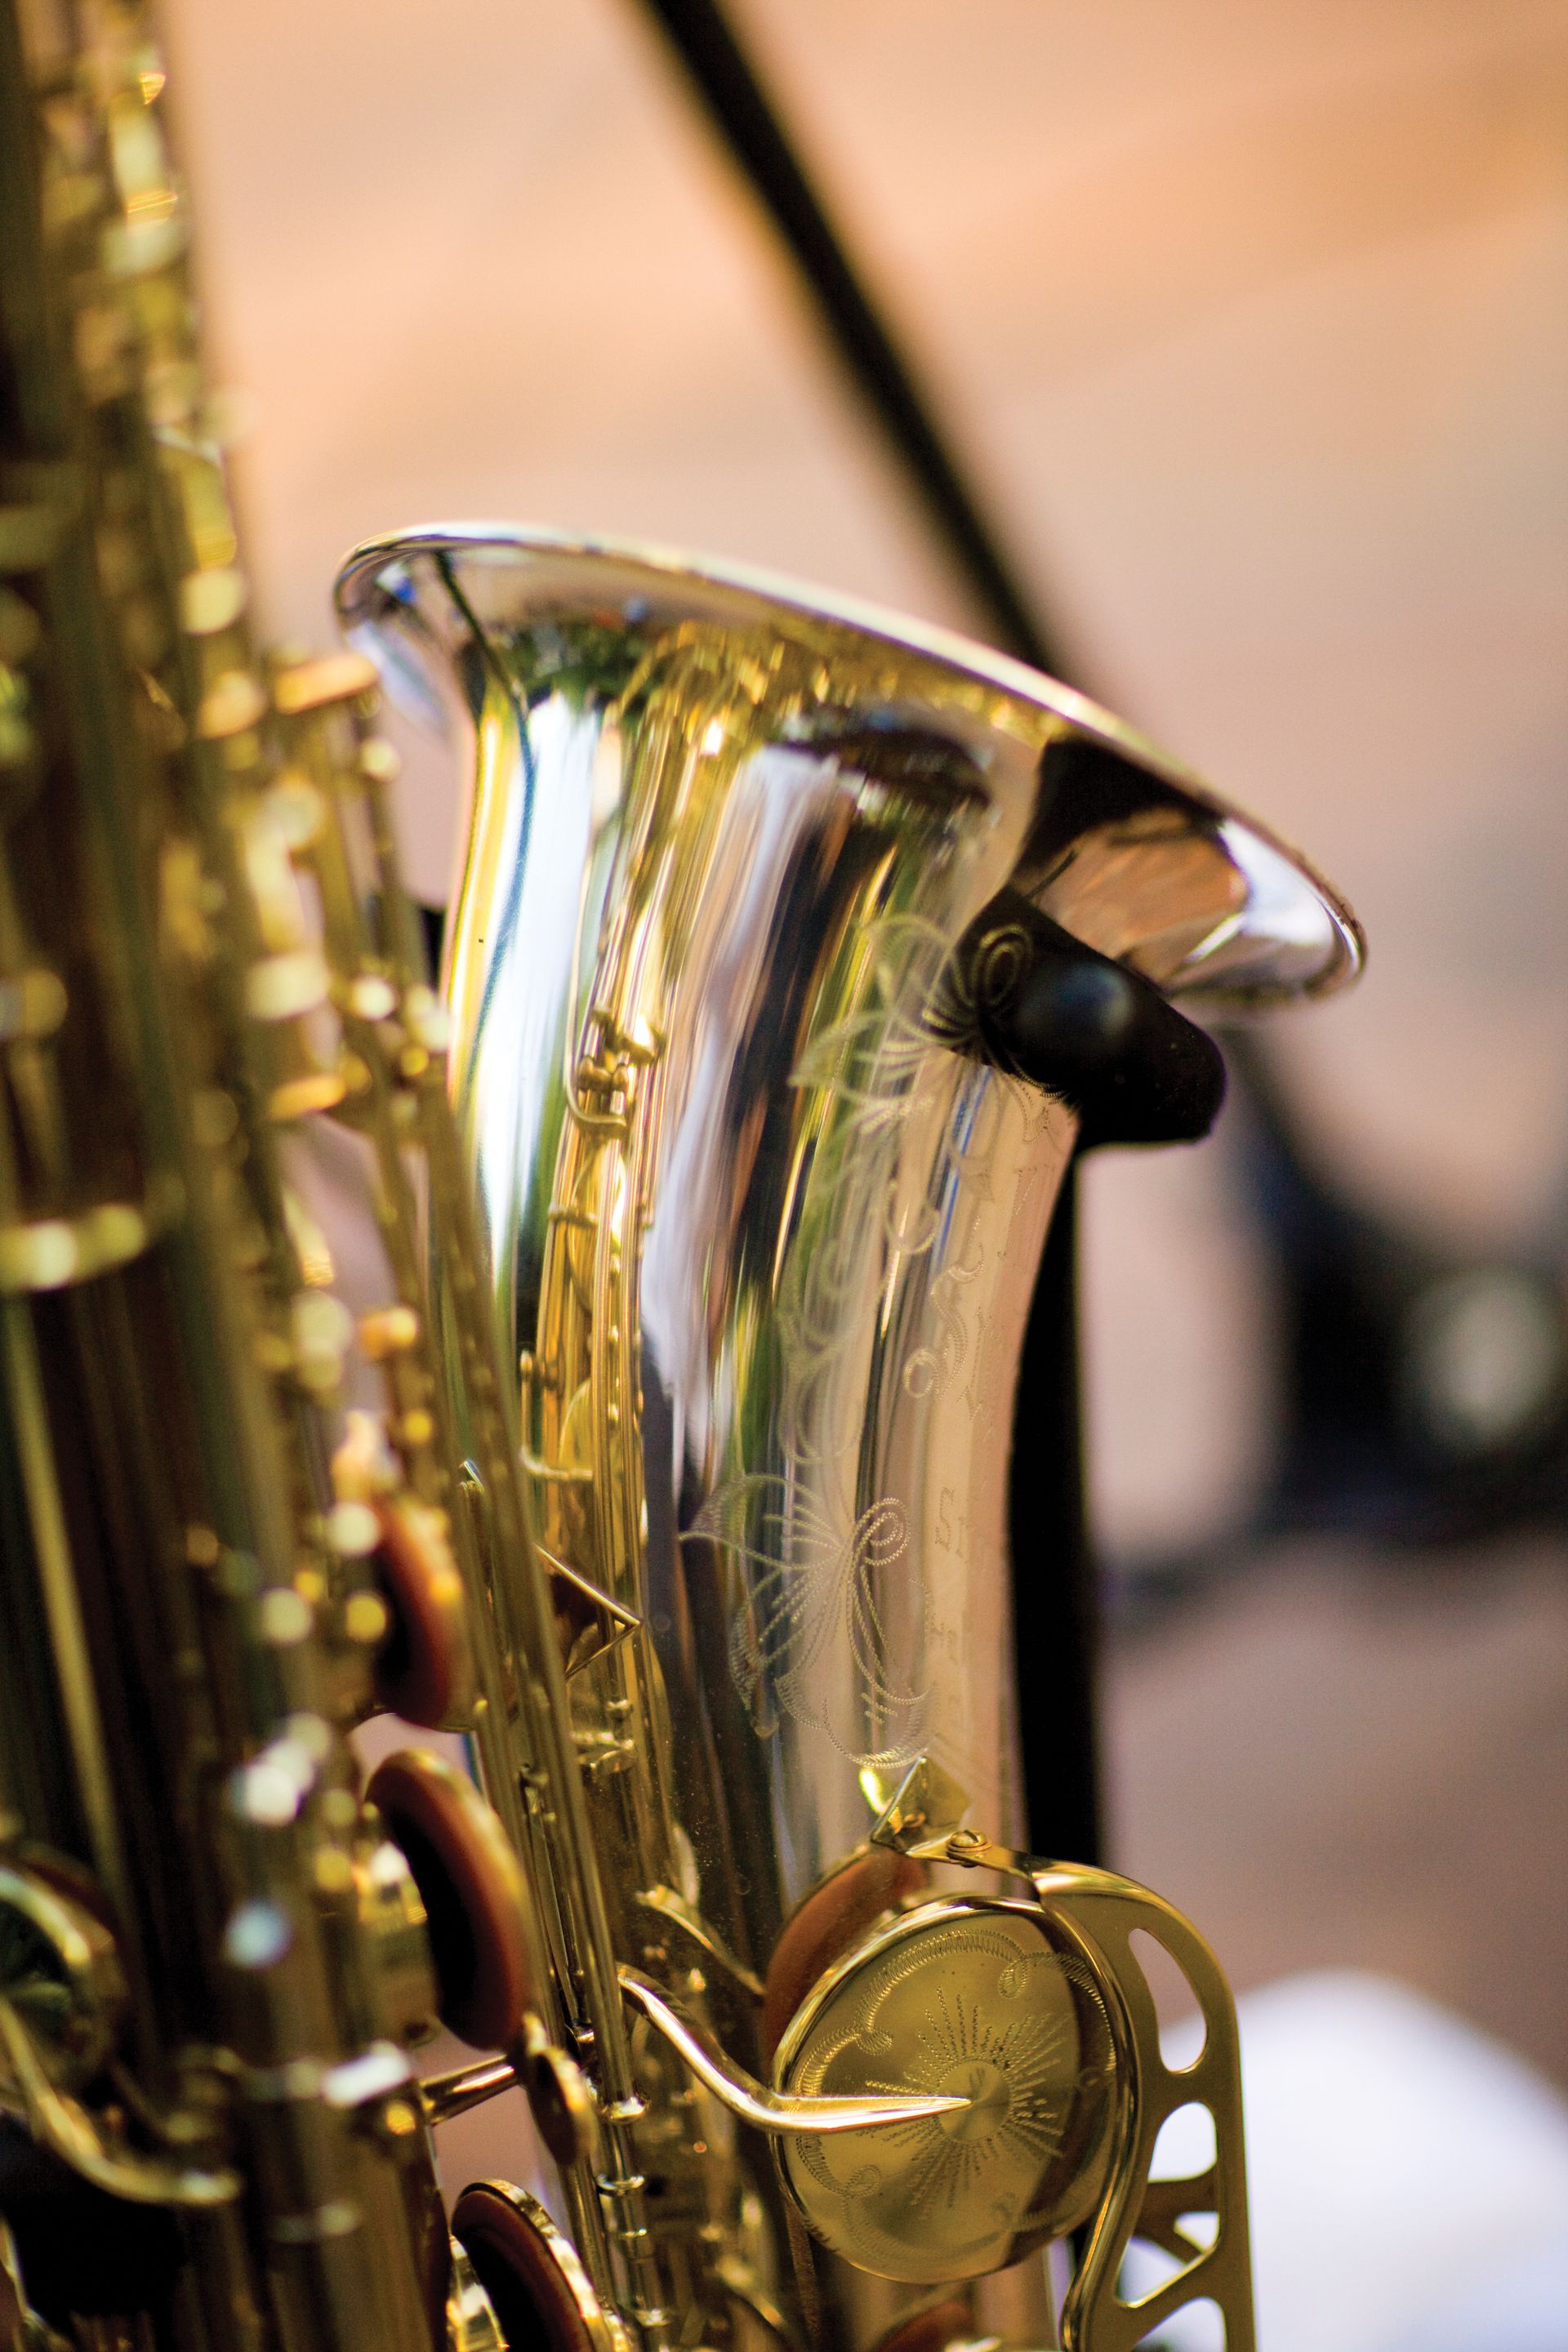 An image of a saxophone.